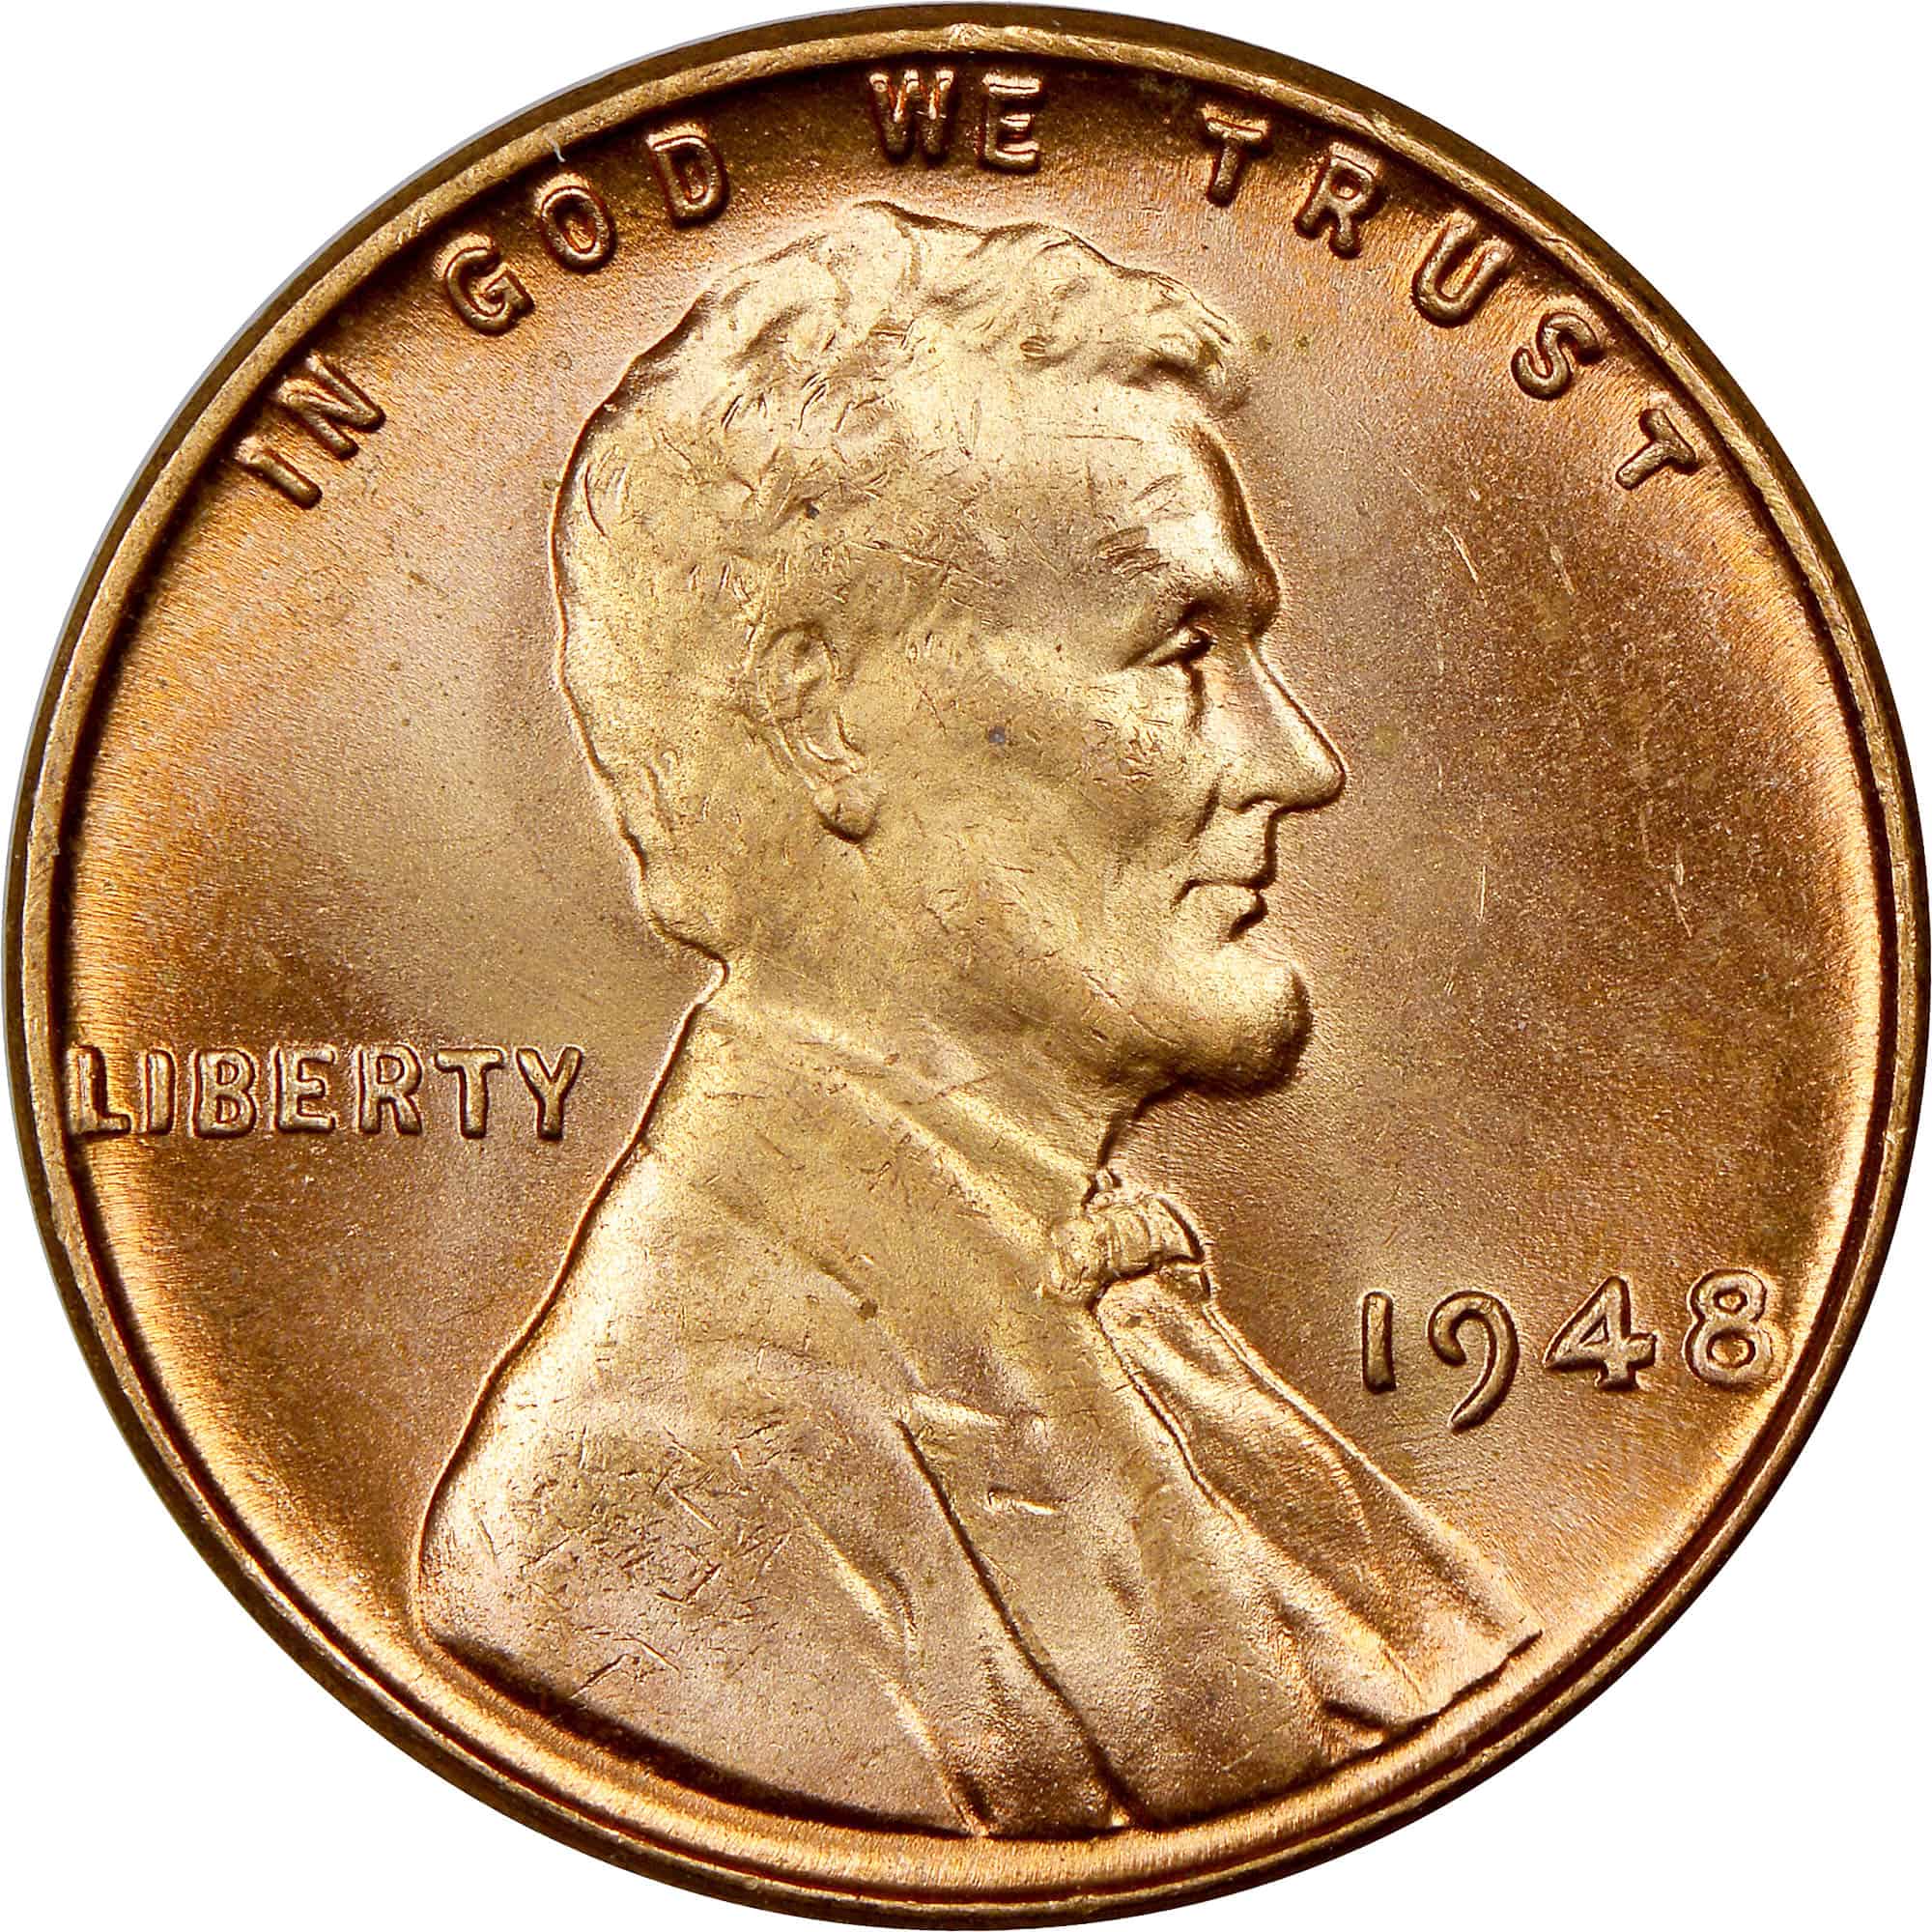 The Obverse of The 1948 Wheat Penny